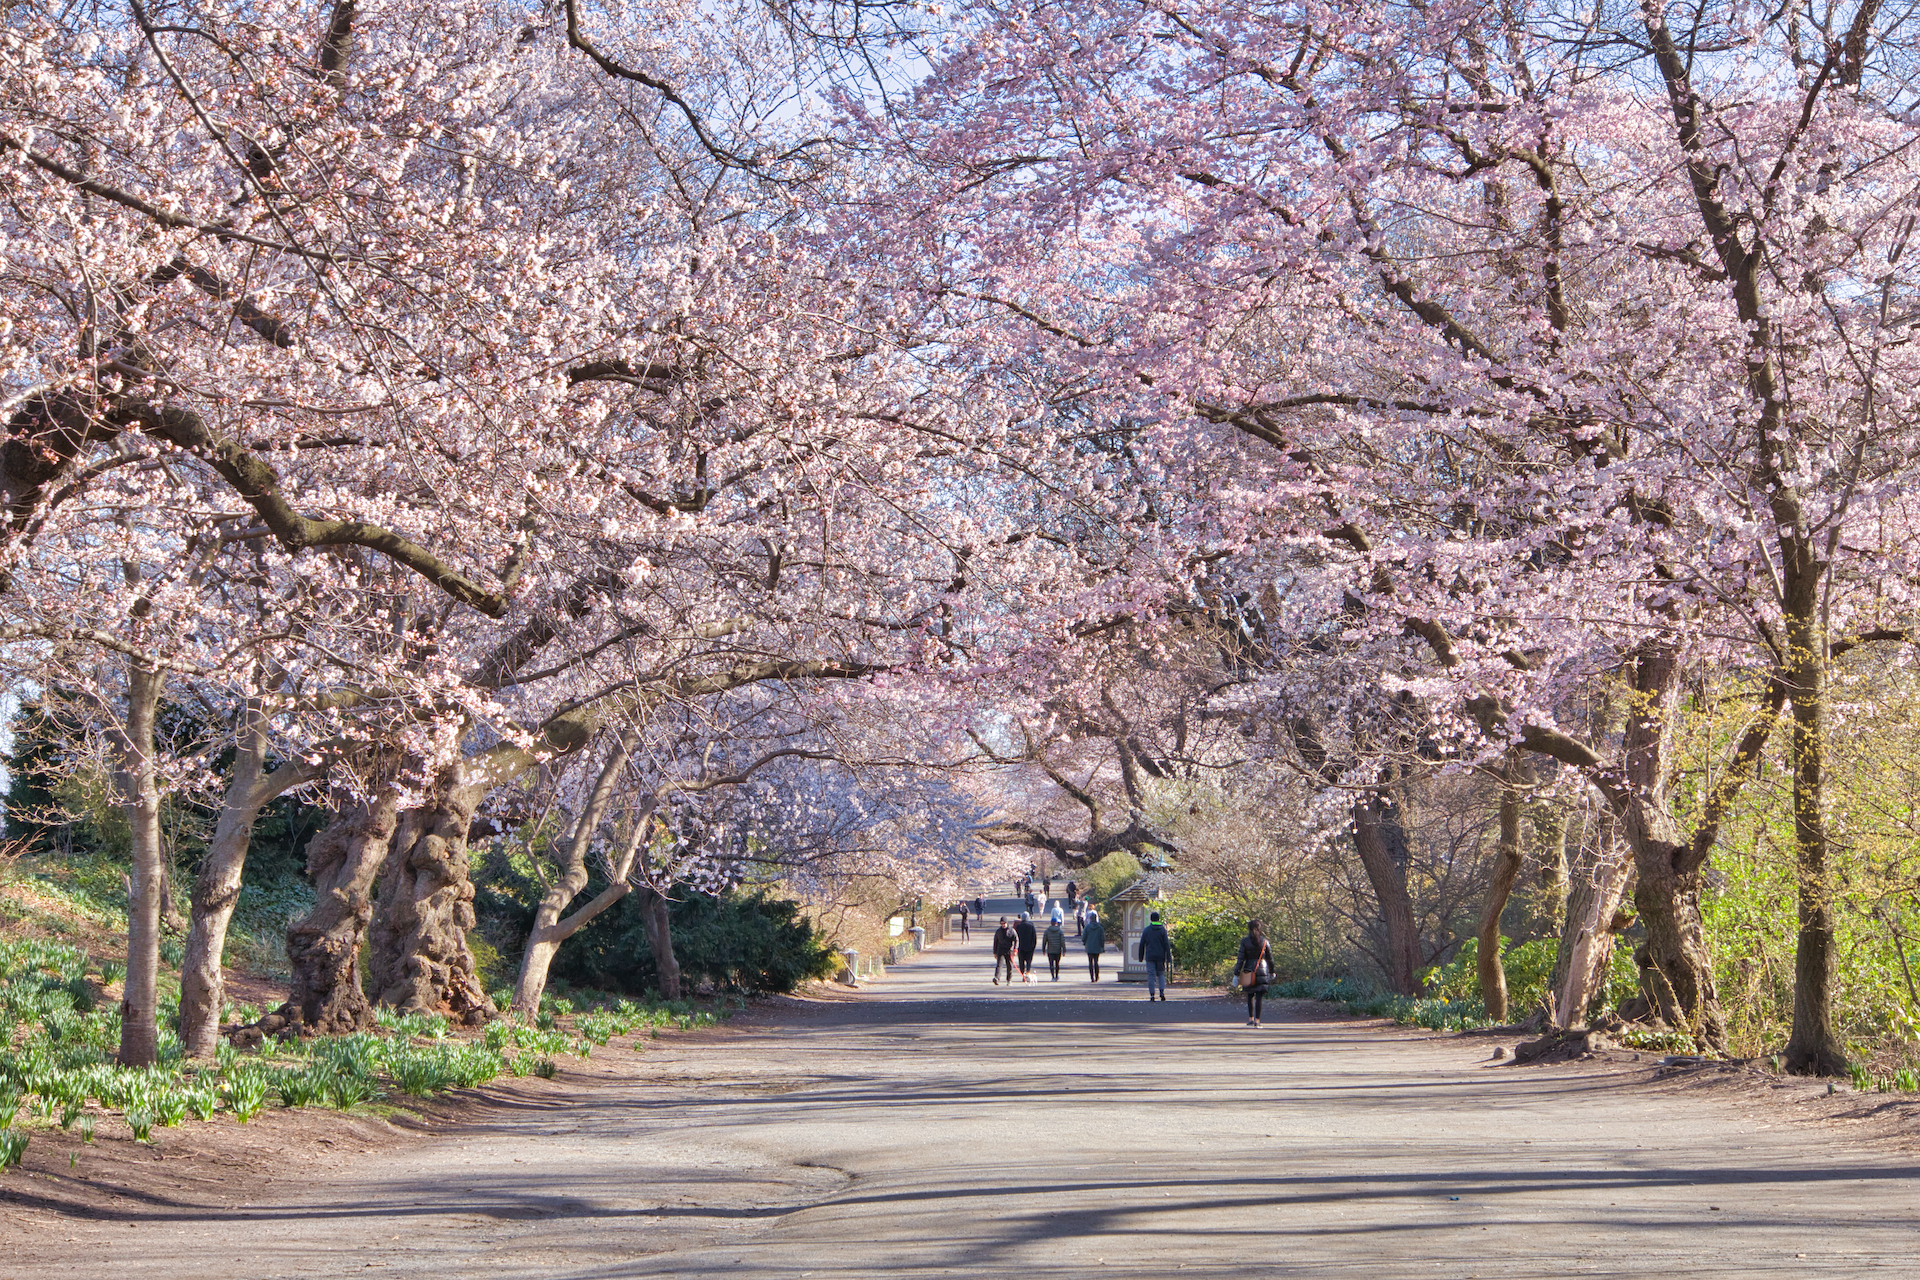 7 best places for cherry blossoms around the world besides Japan in 2022